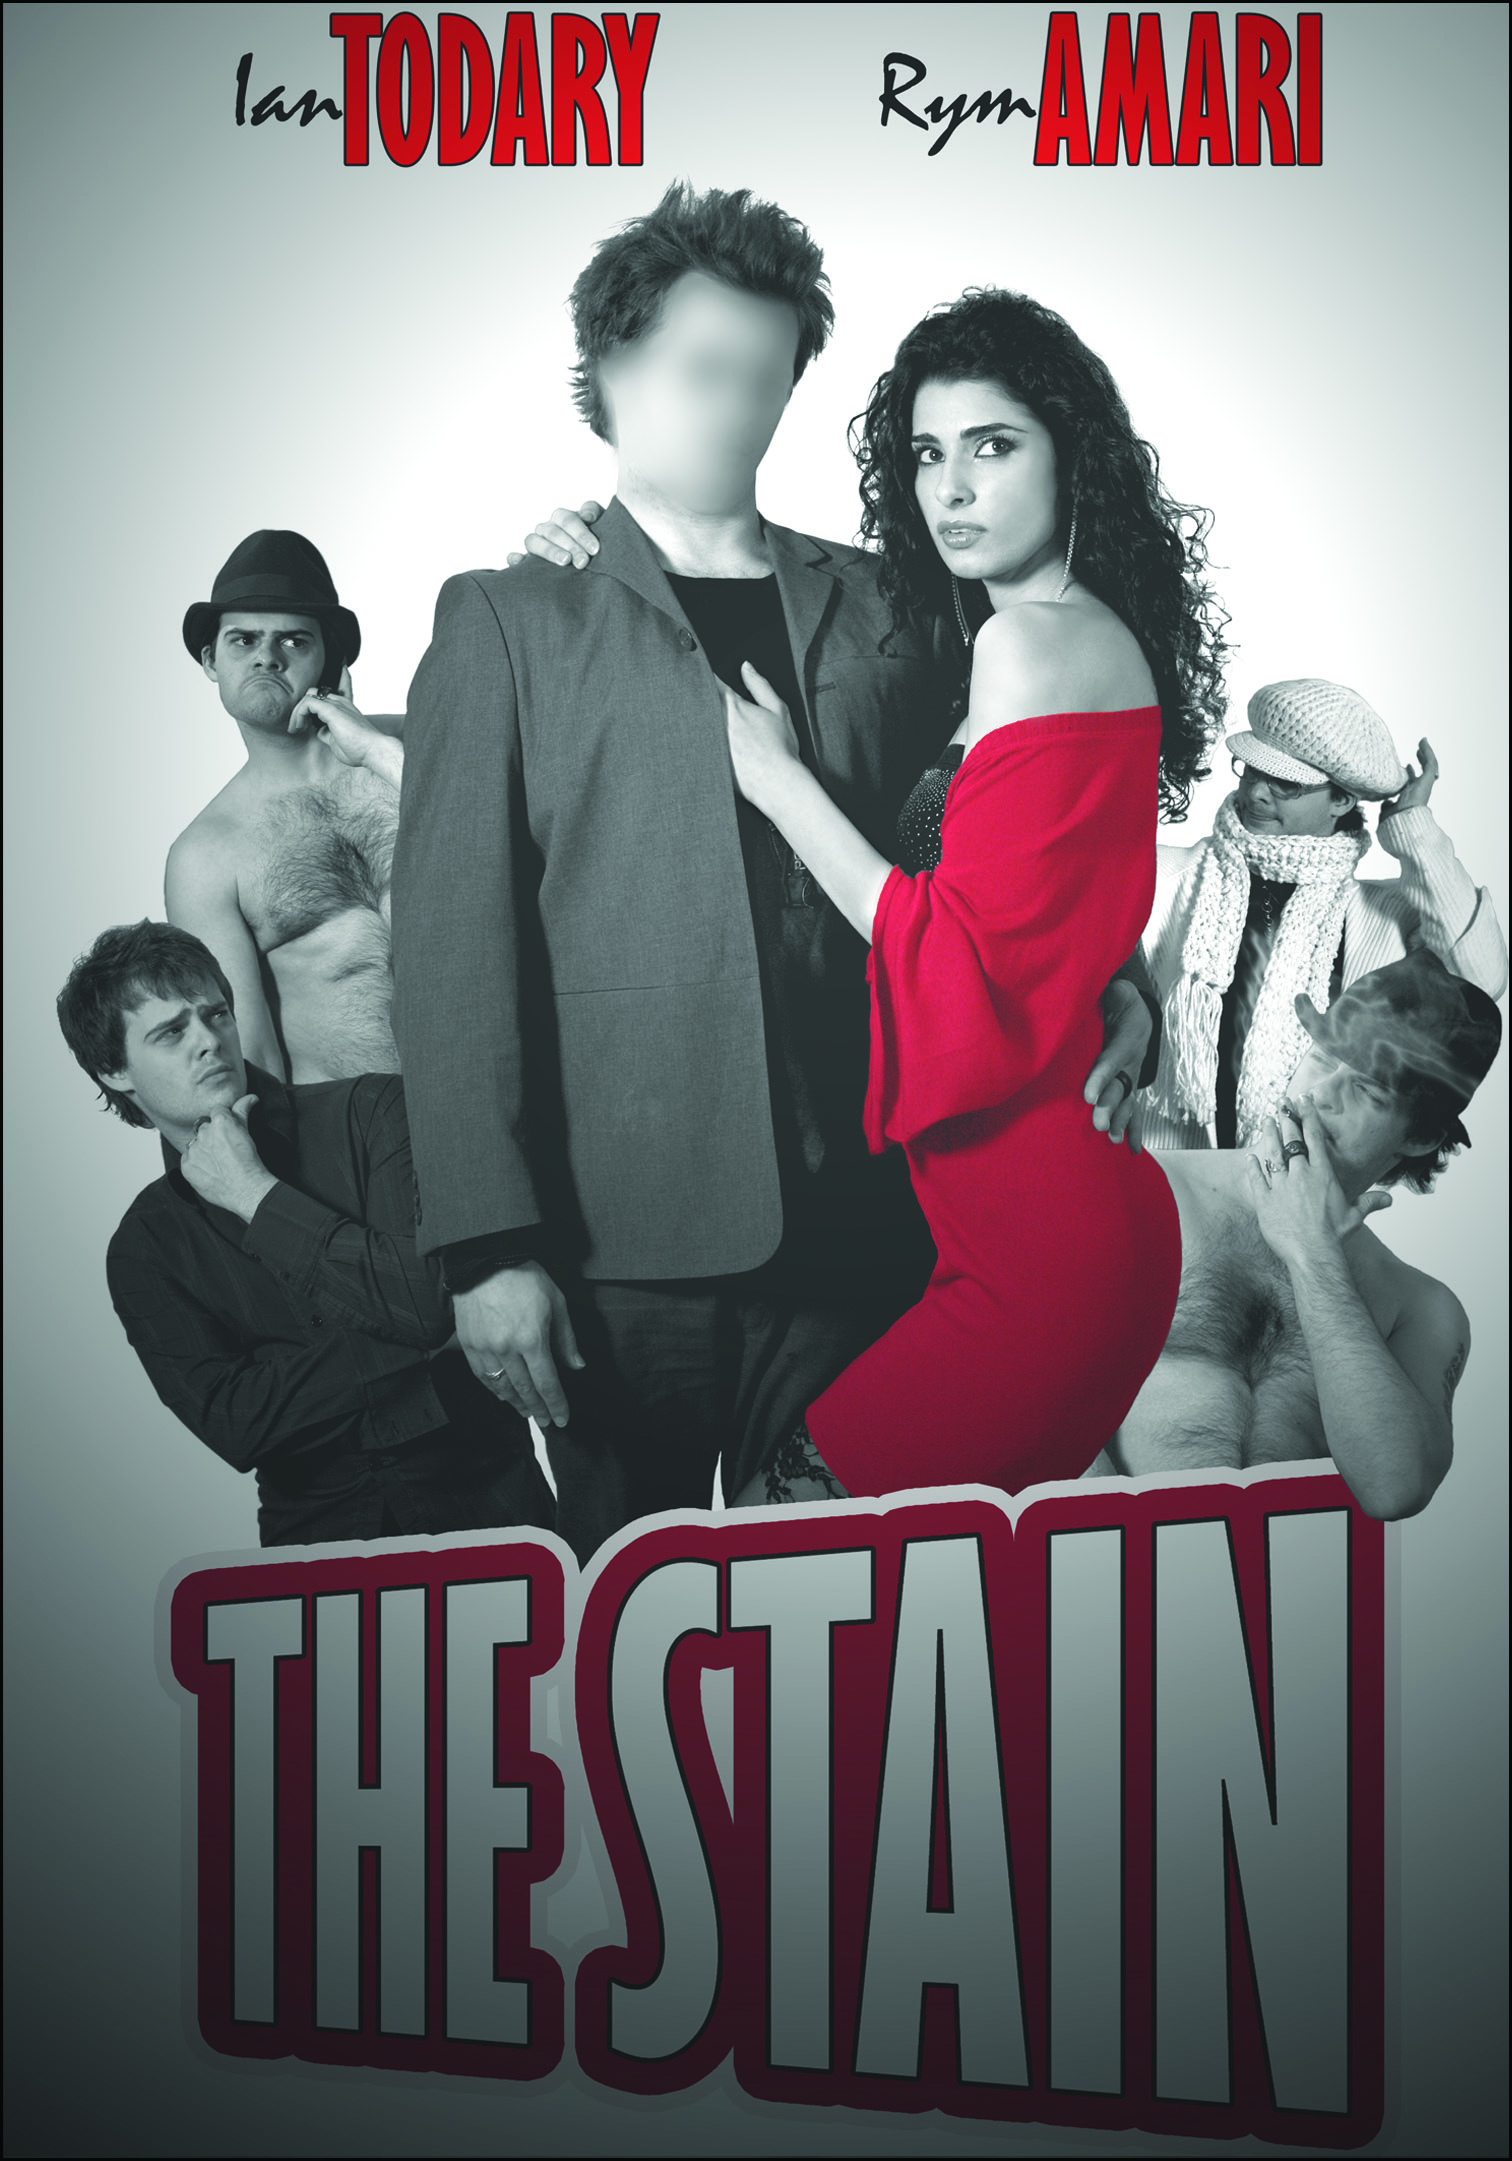 Poster of Ian Todary's THE STAIN screened at film festivals